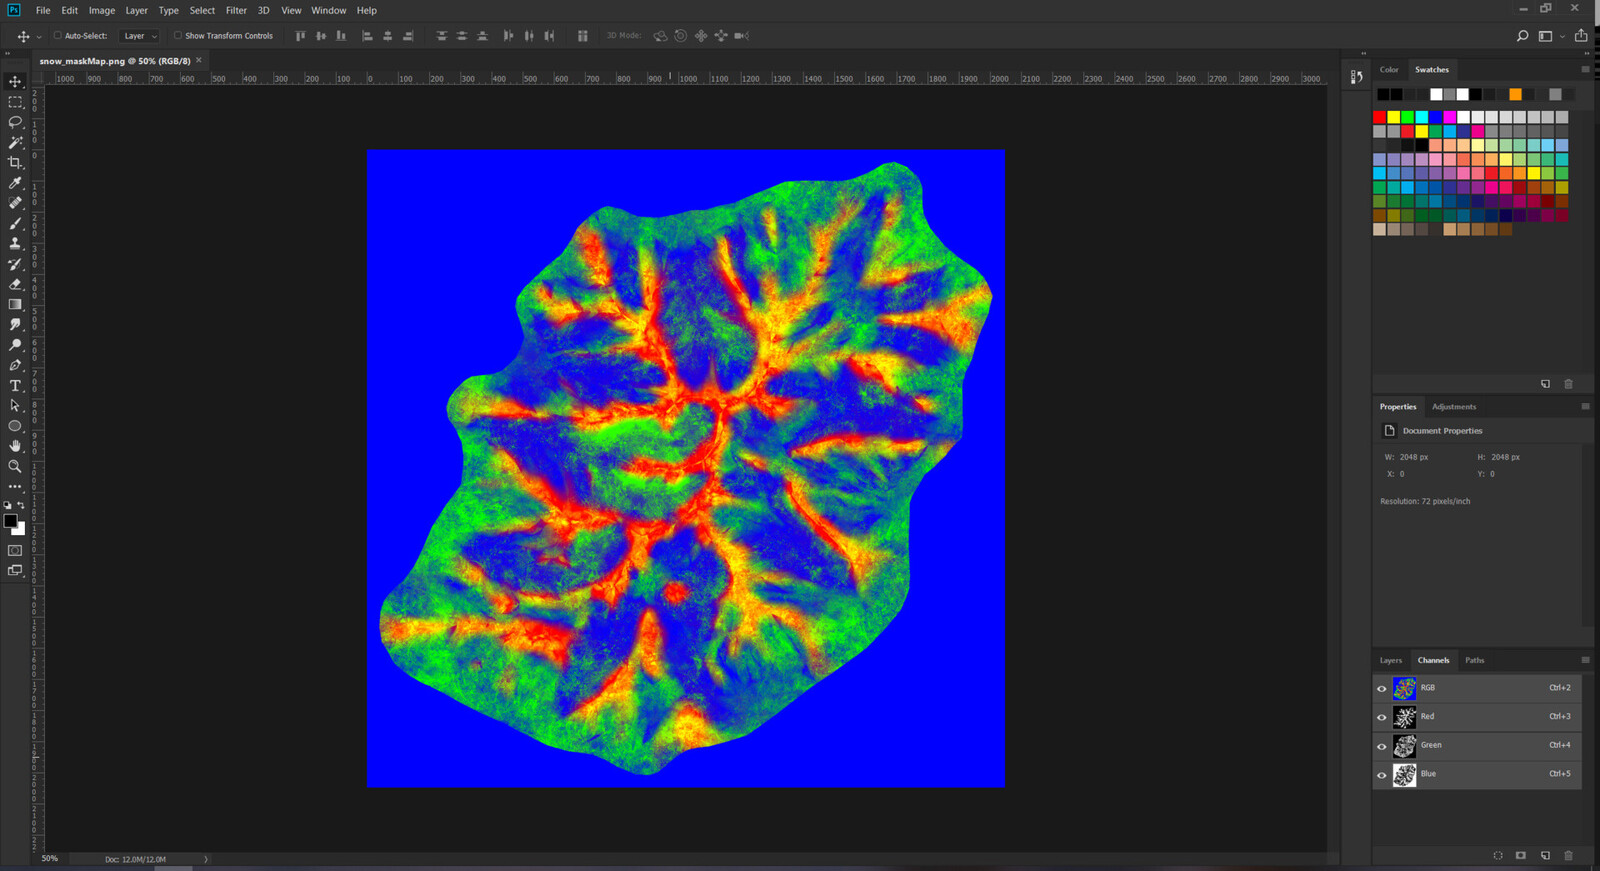 Viewing/Editing splat map in Photoshop.